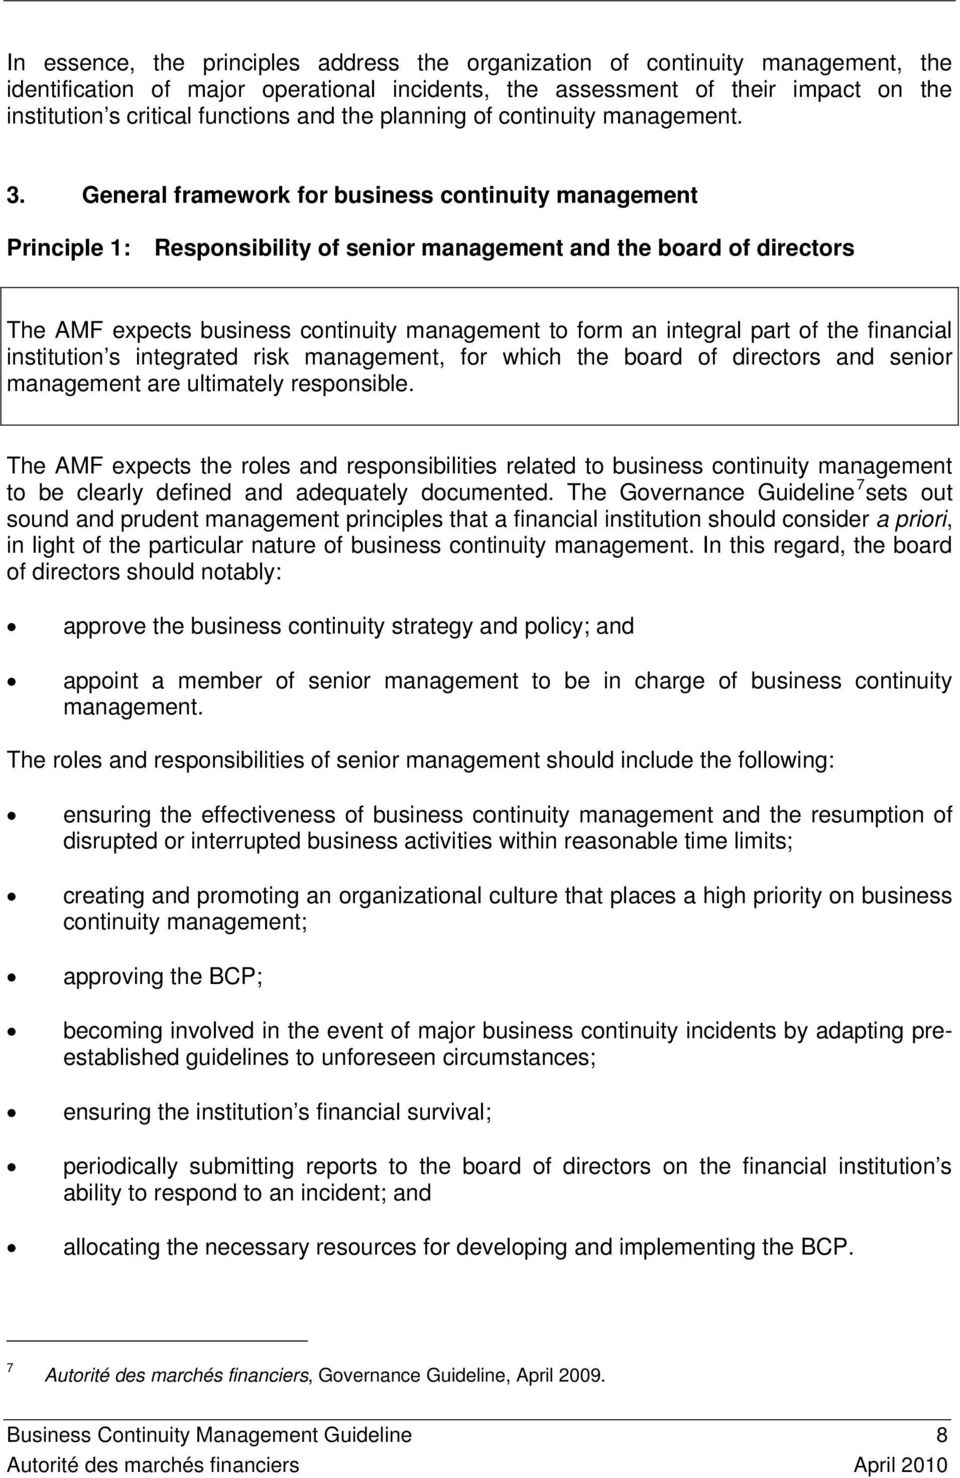 General framework for business continuity management Principle 1: Responsibility of senior management and the board of directors The AMF expects business continuity management to form an integral